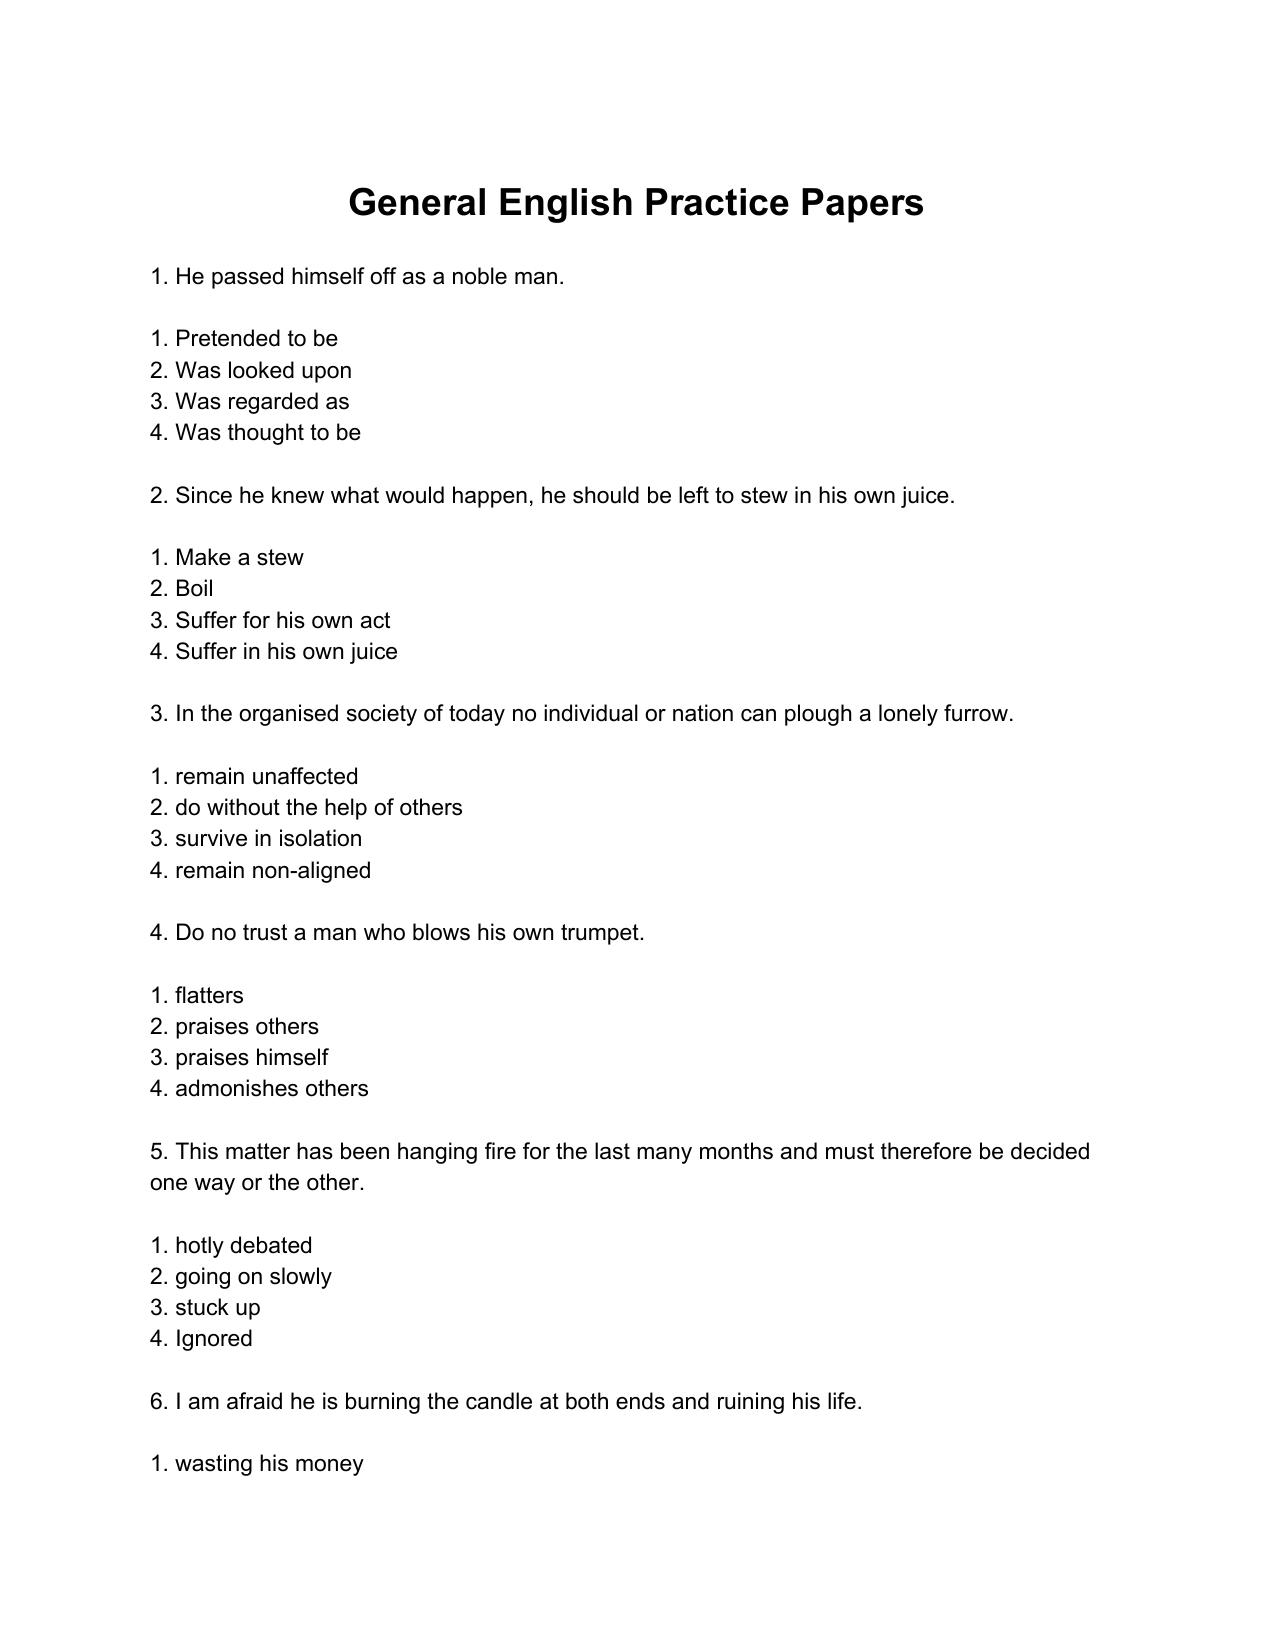 Download Assam Police Practice Papers For General English - Page 1